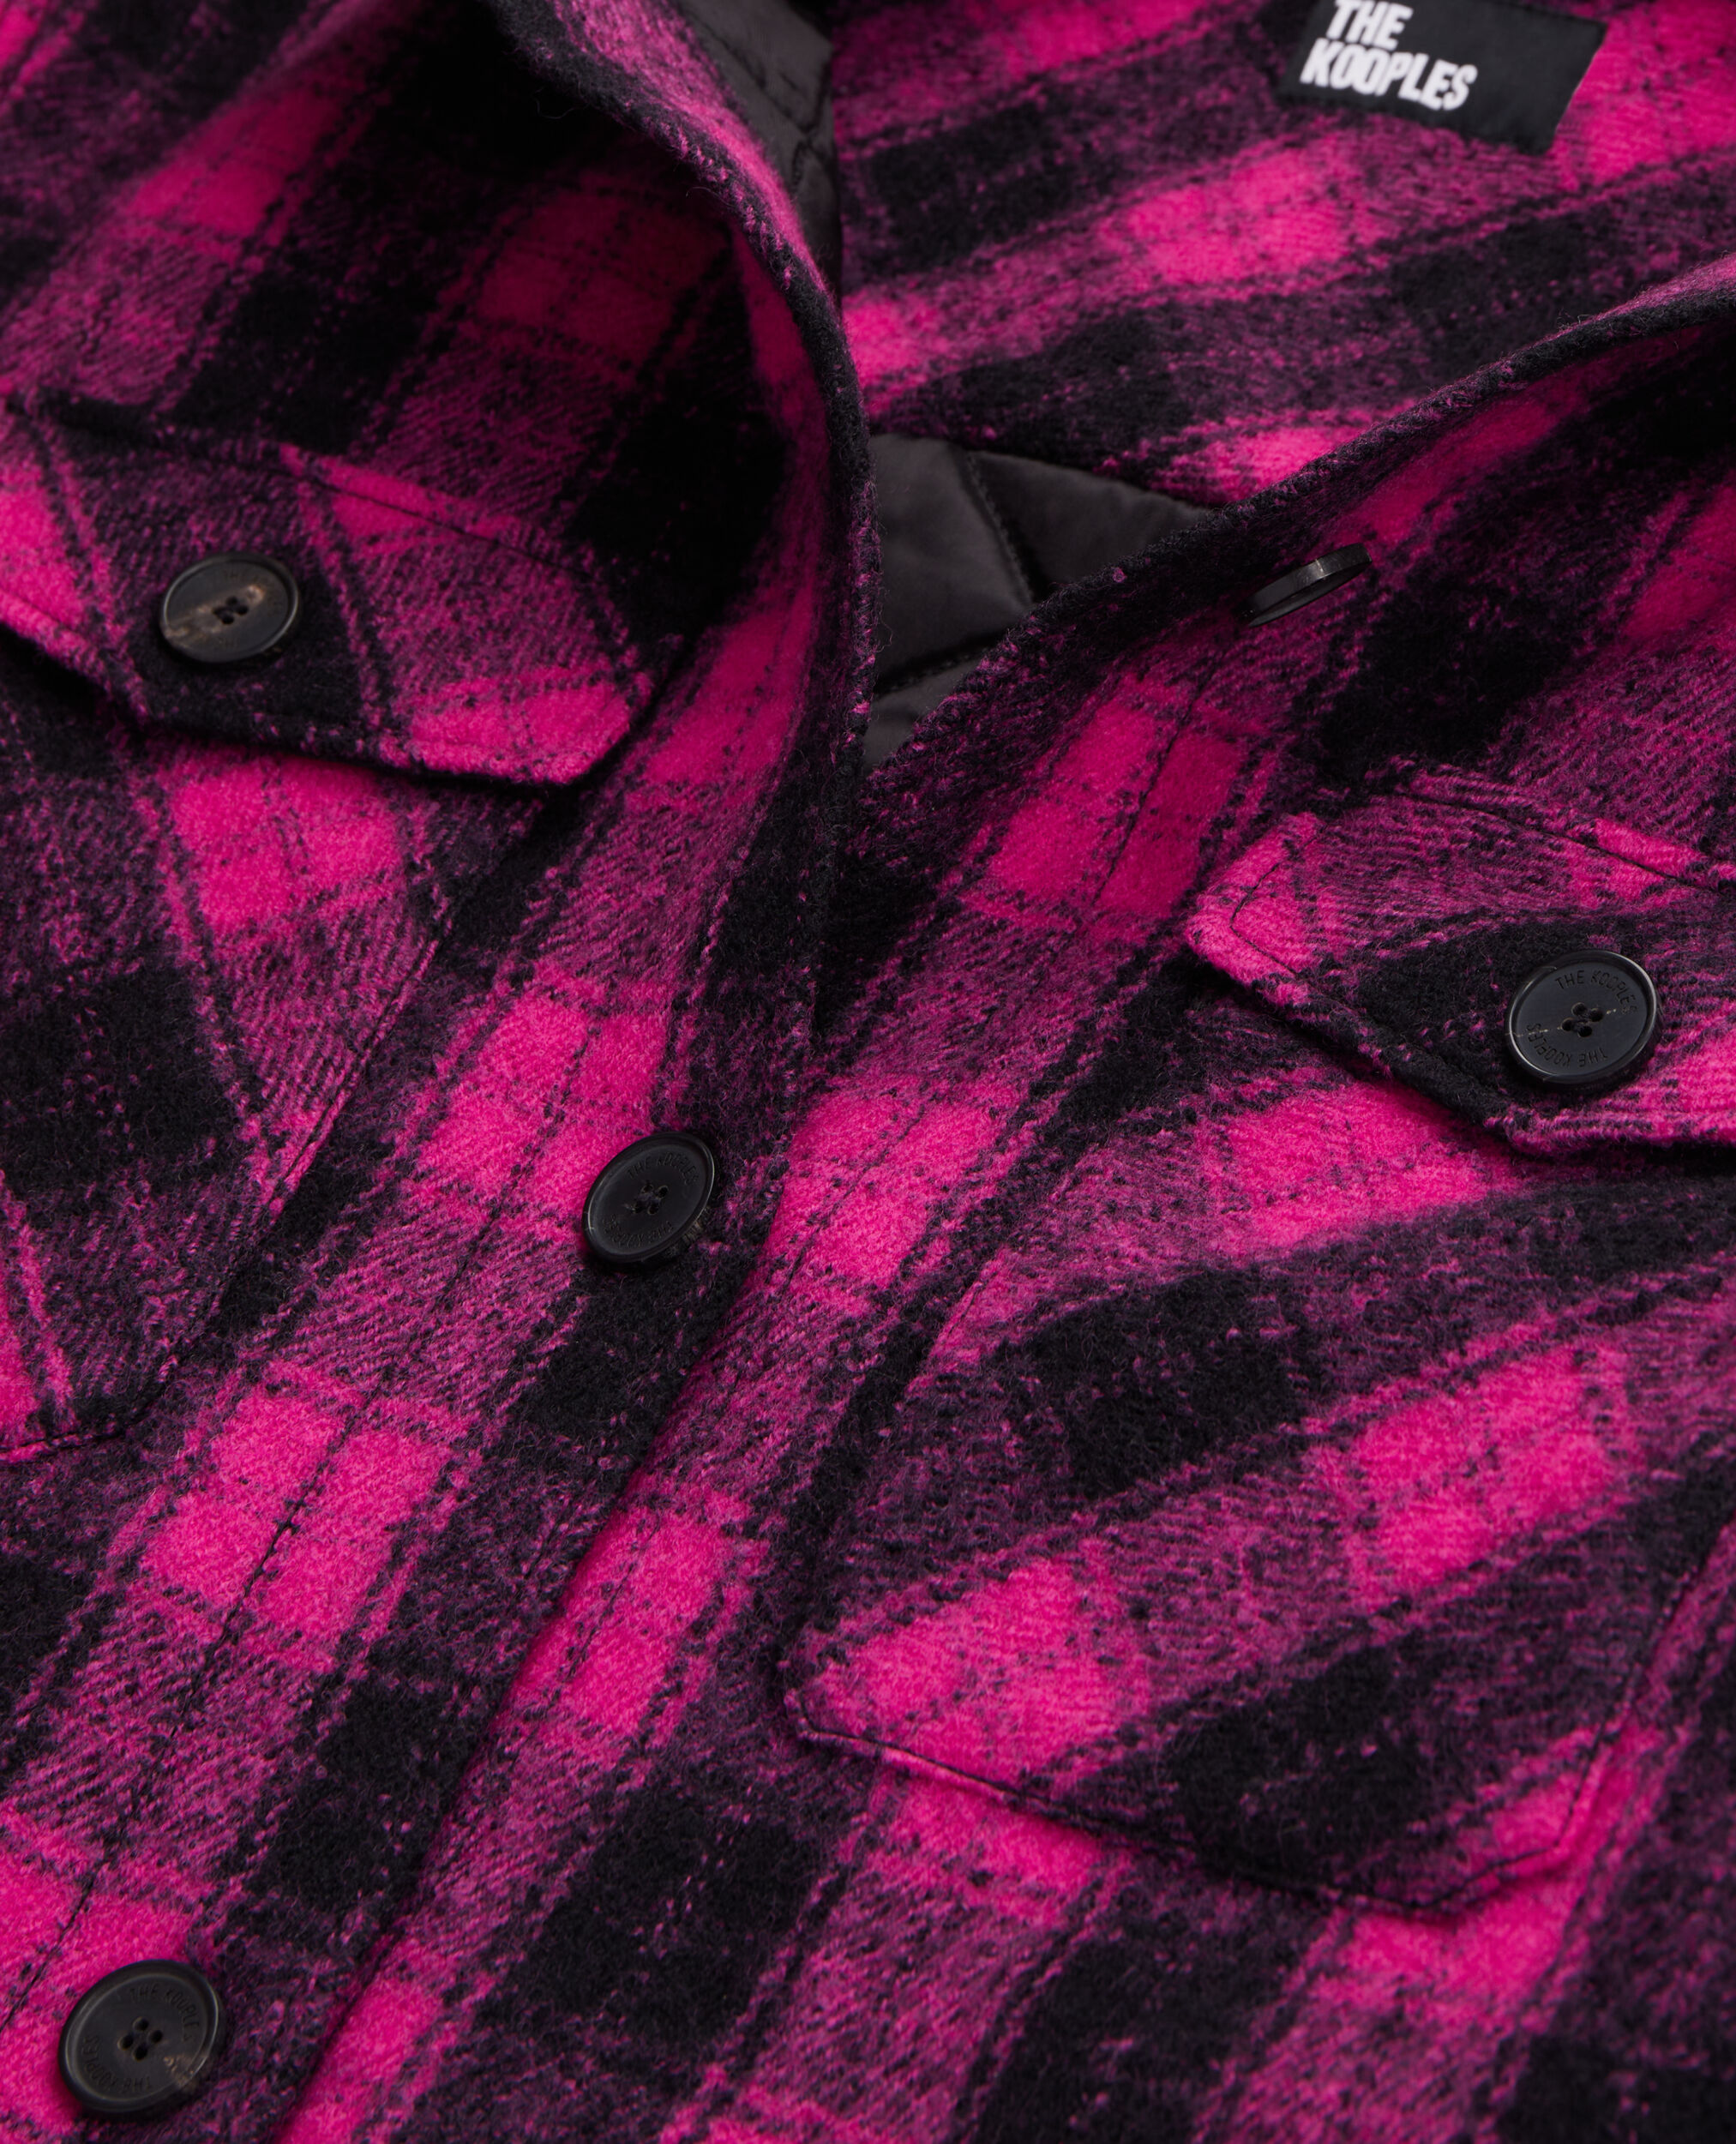 Overshirt style jacket with pink checks, PINK BLACK, hi-res image number null